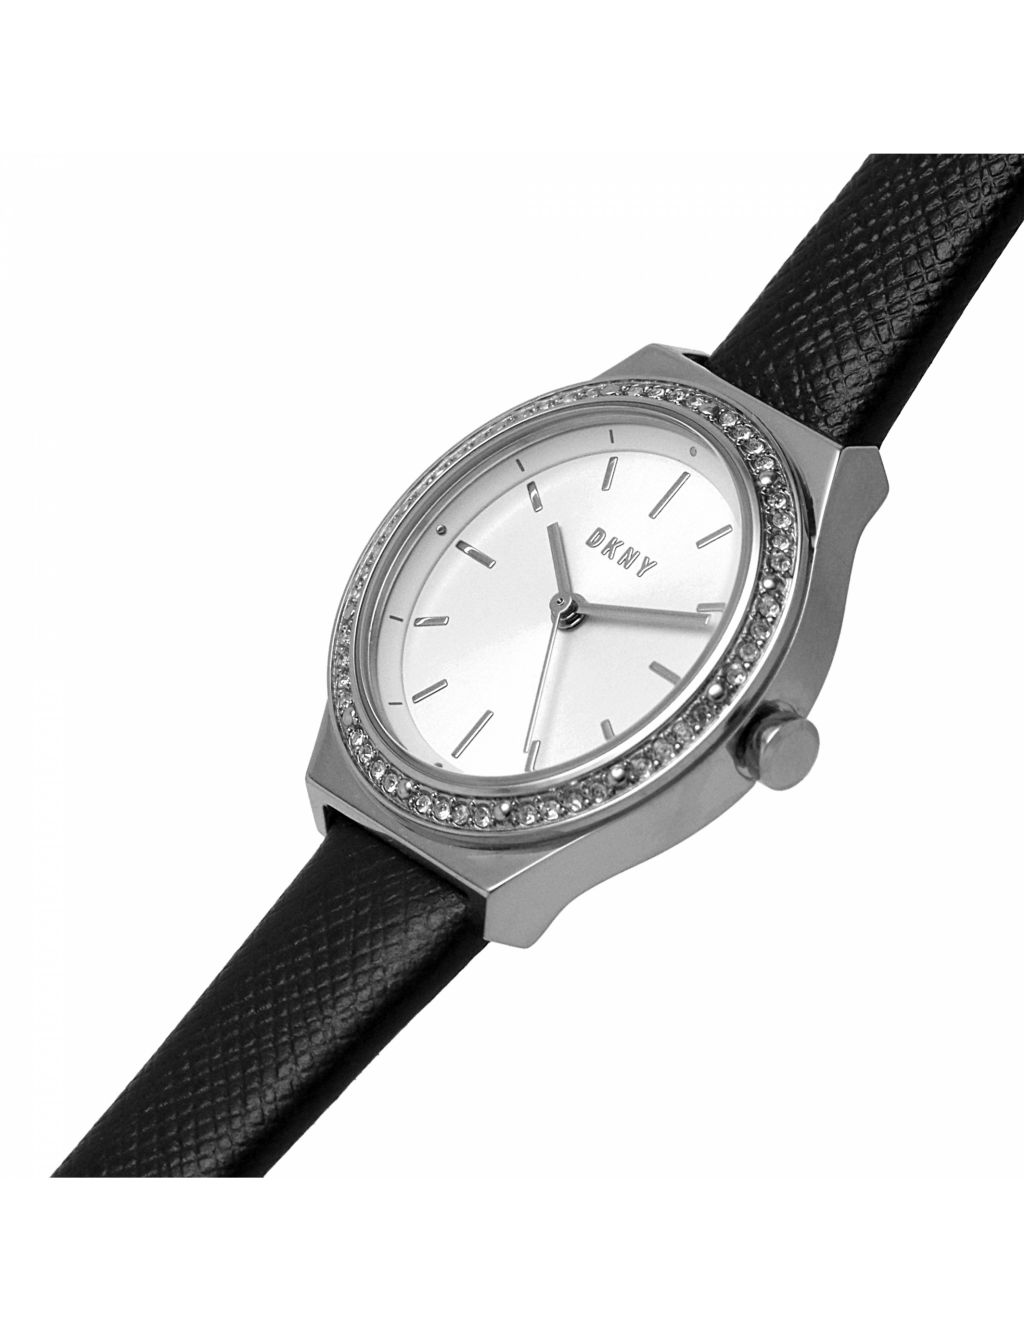 DKNY Parsons Black Leather Watch image 7